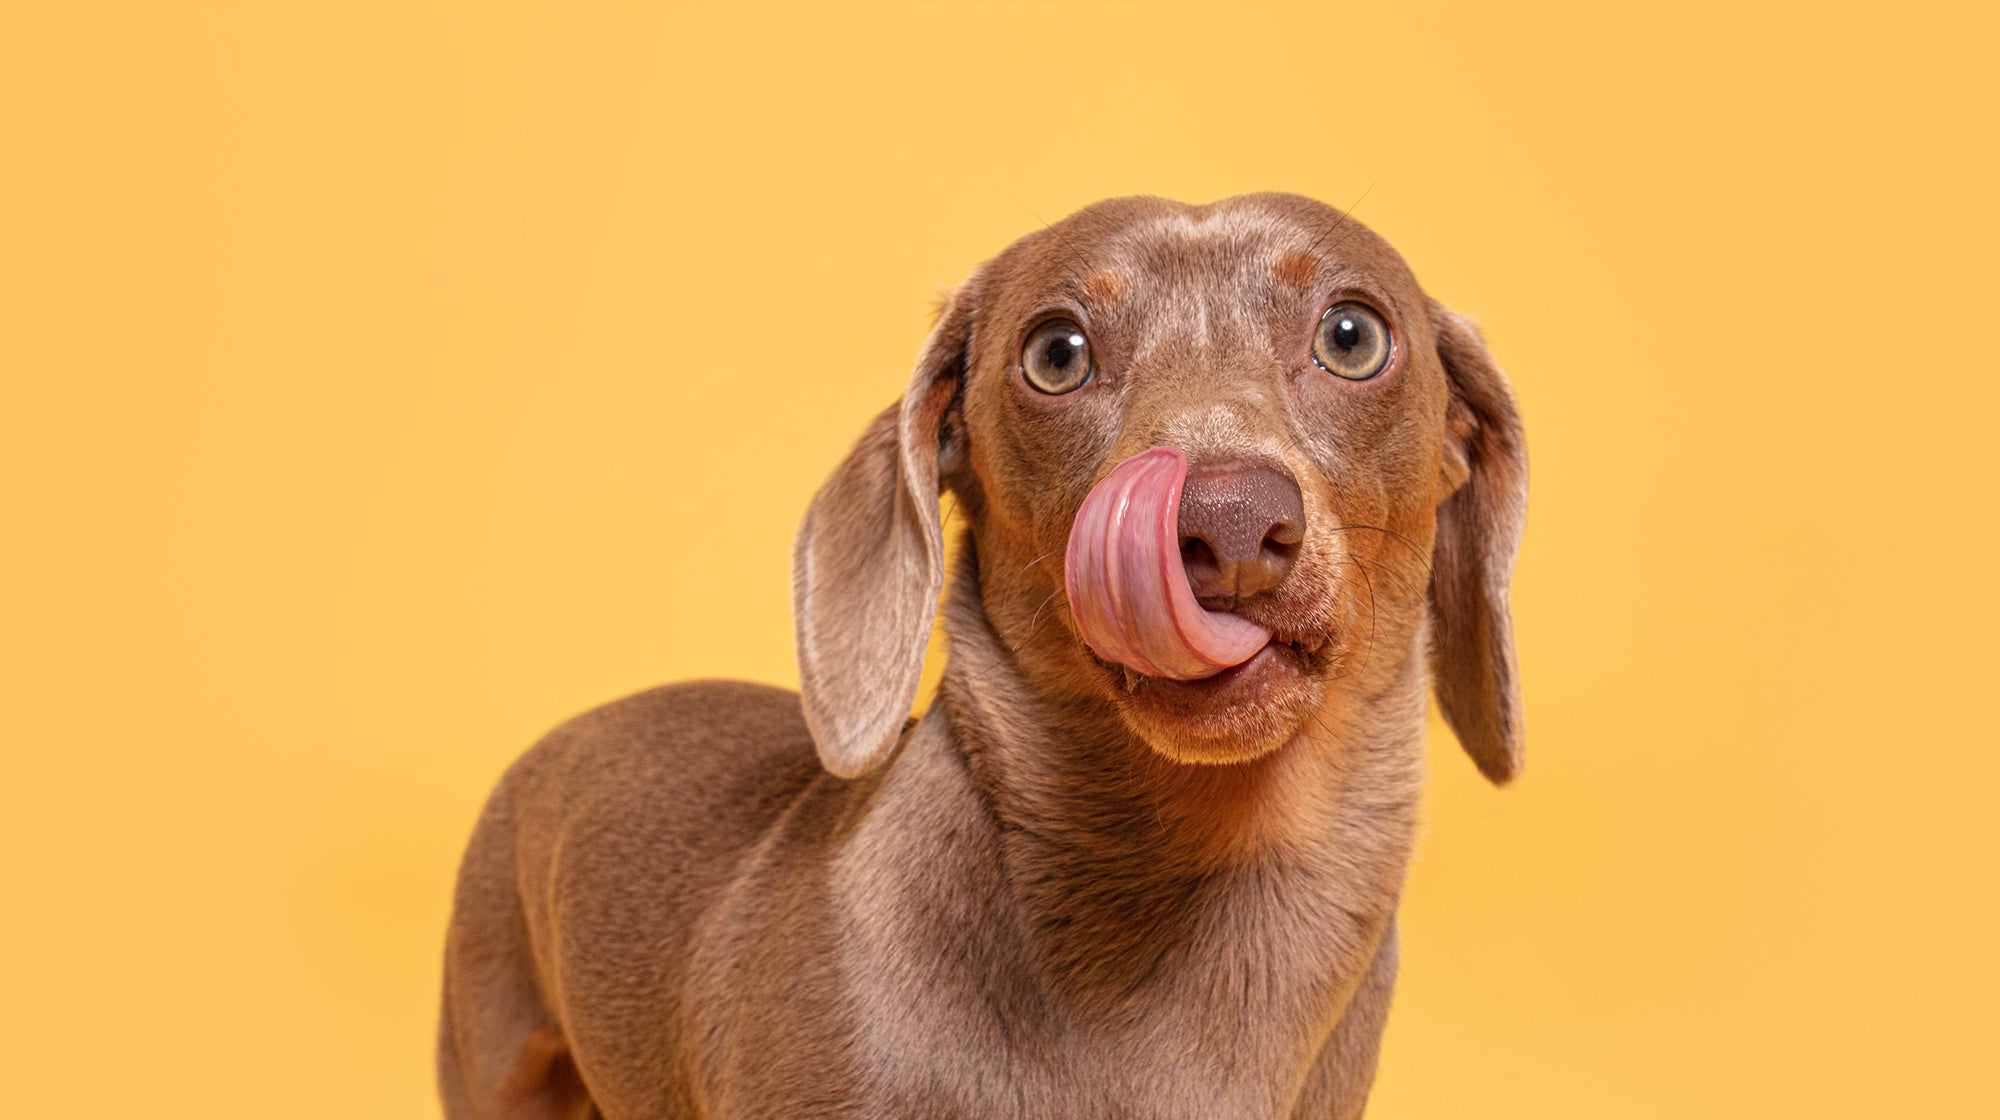 Brown Dachshund dog licking its lips, against a yellow background